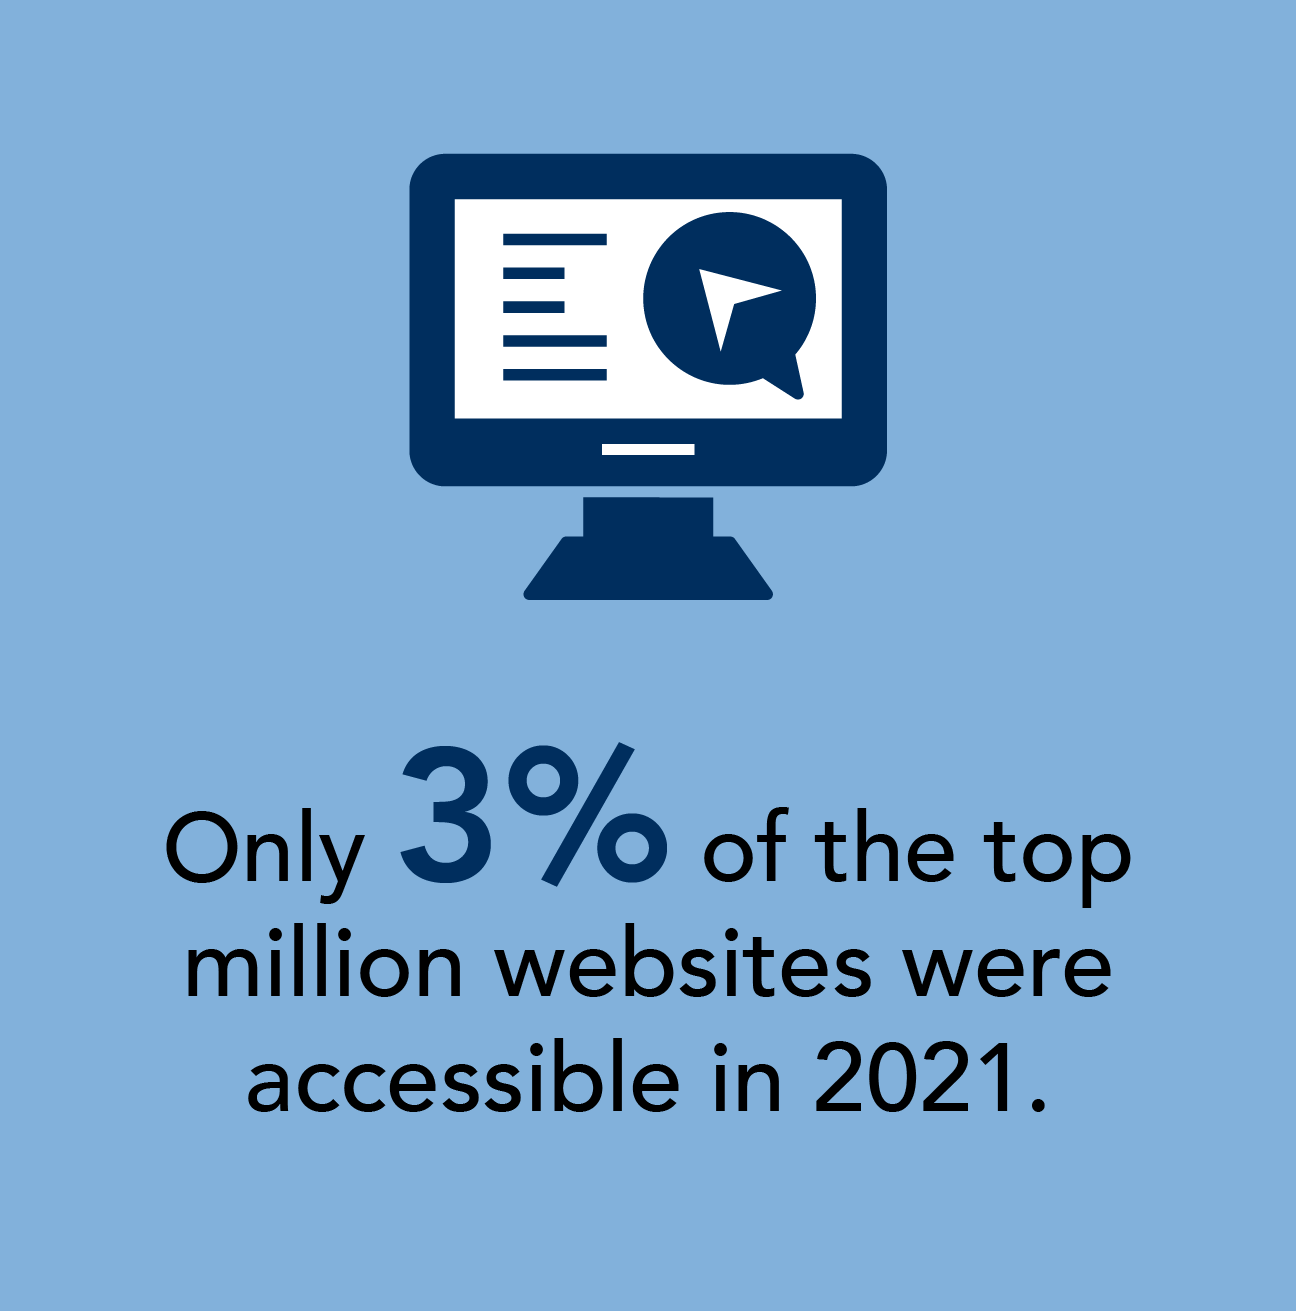 Only 3% of the top million websites were accessible in 2021.